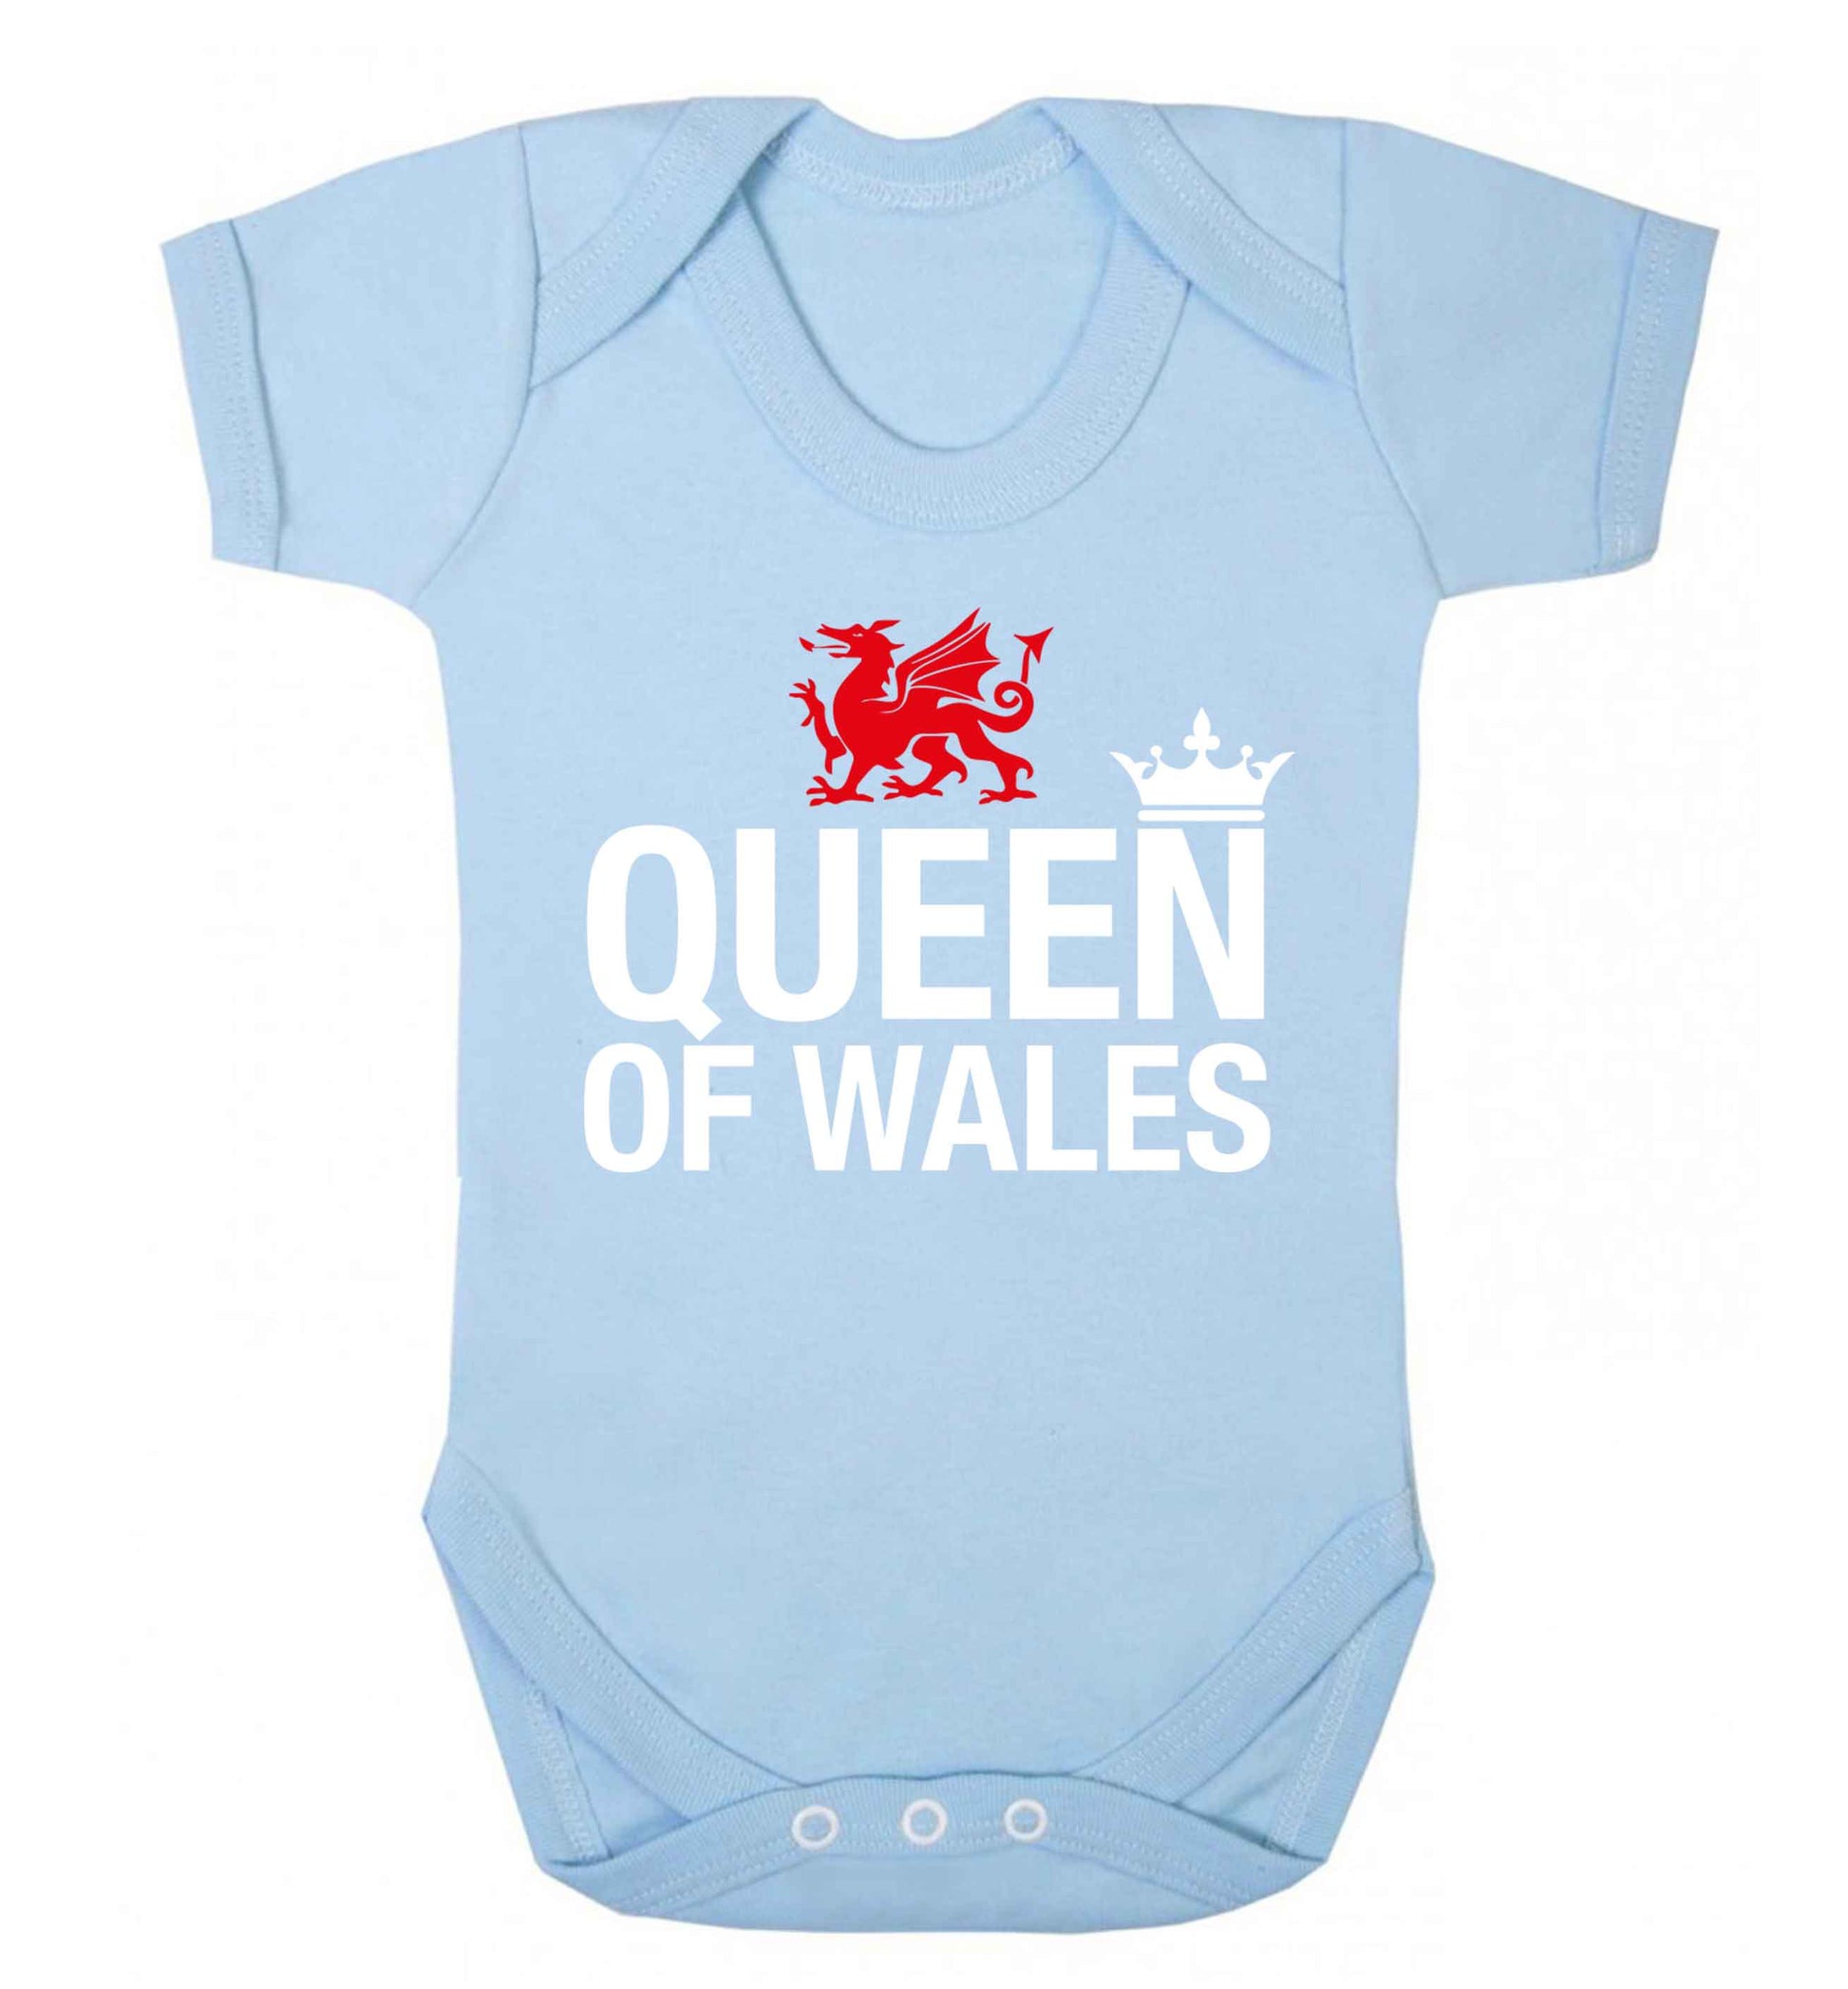 Queen of Wales Baby Vest pale blue 18-24 months